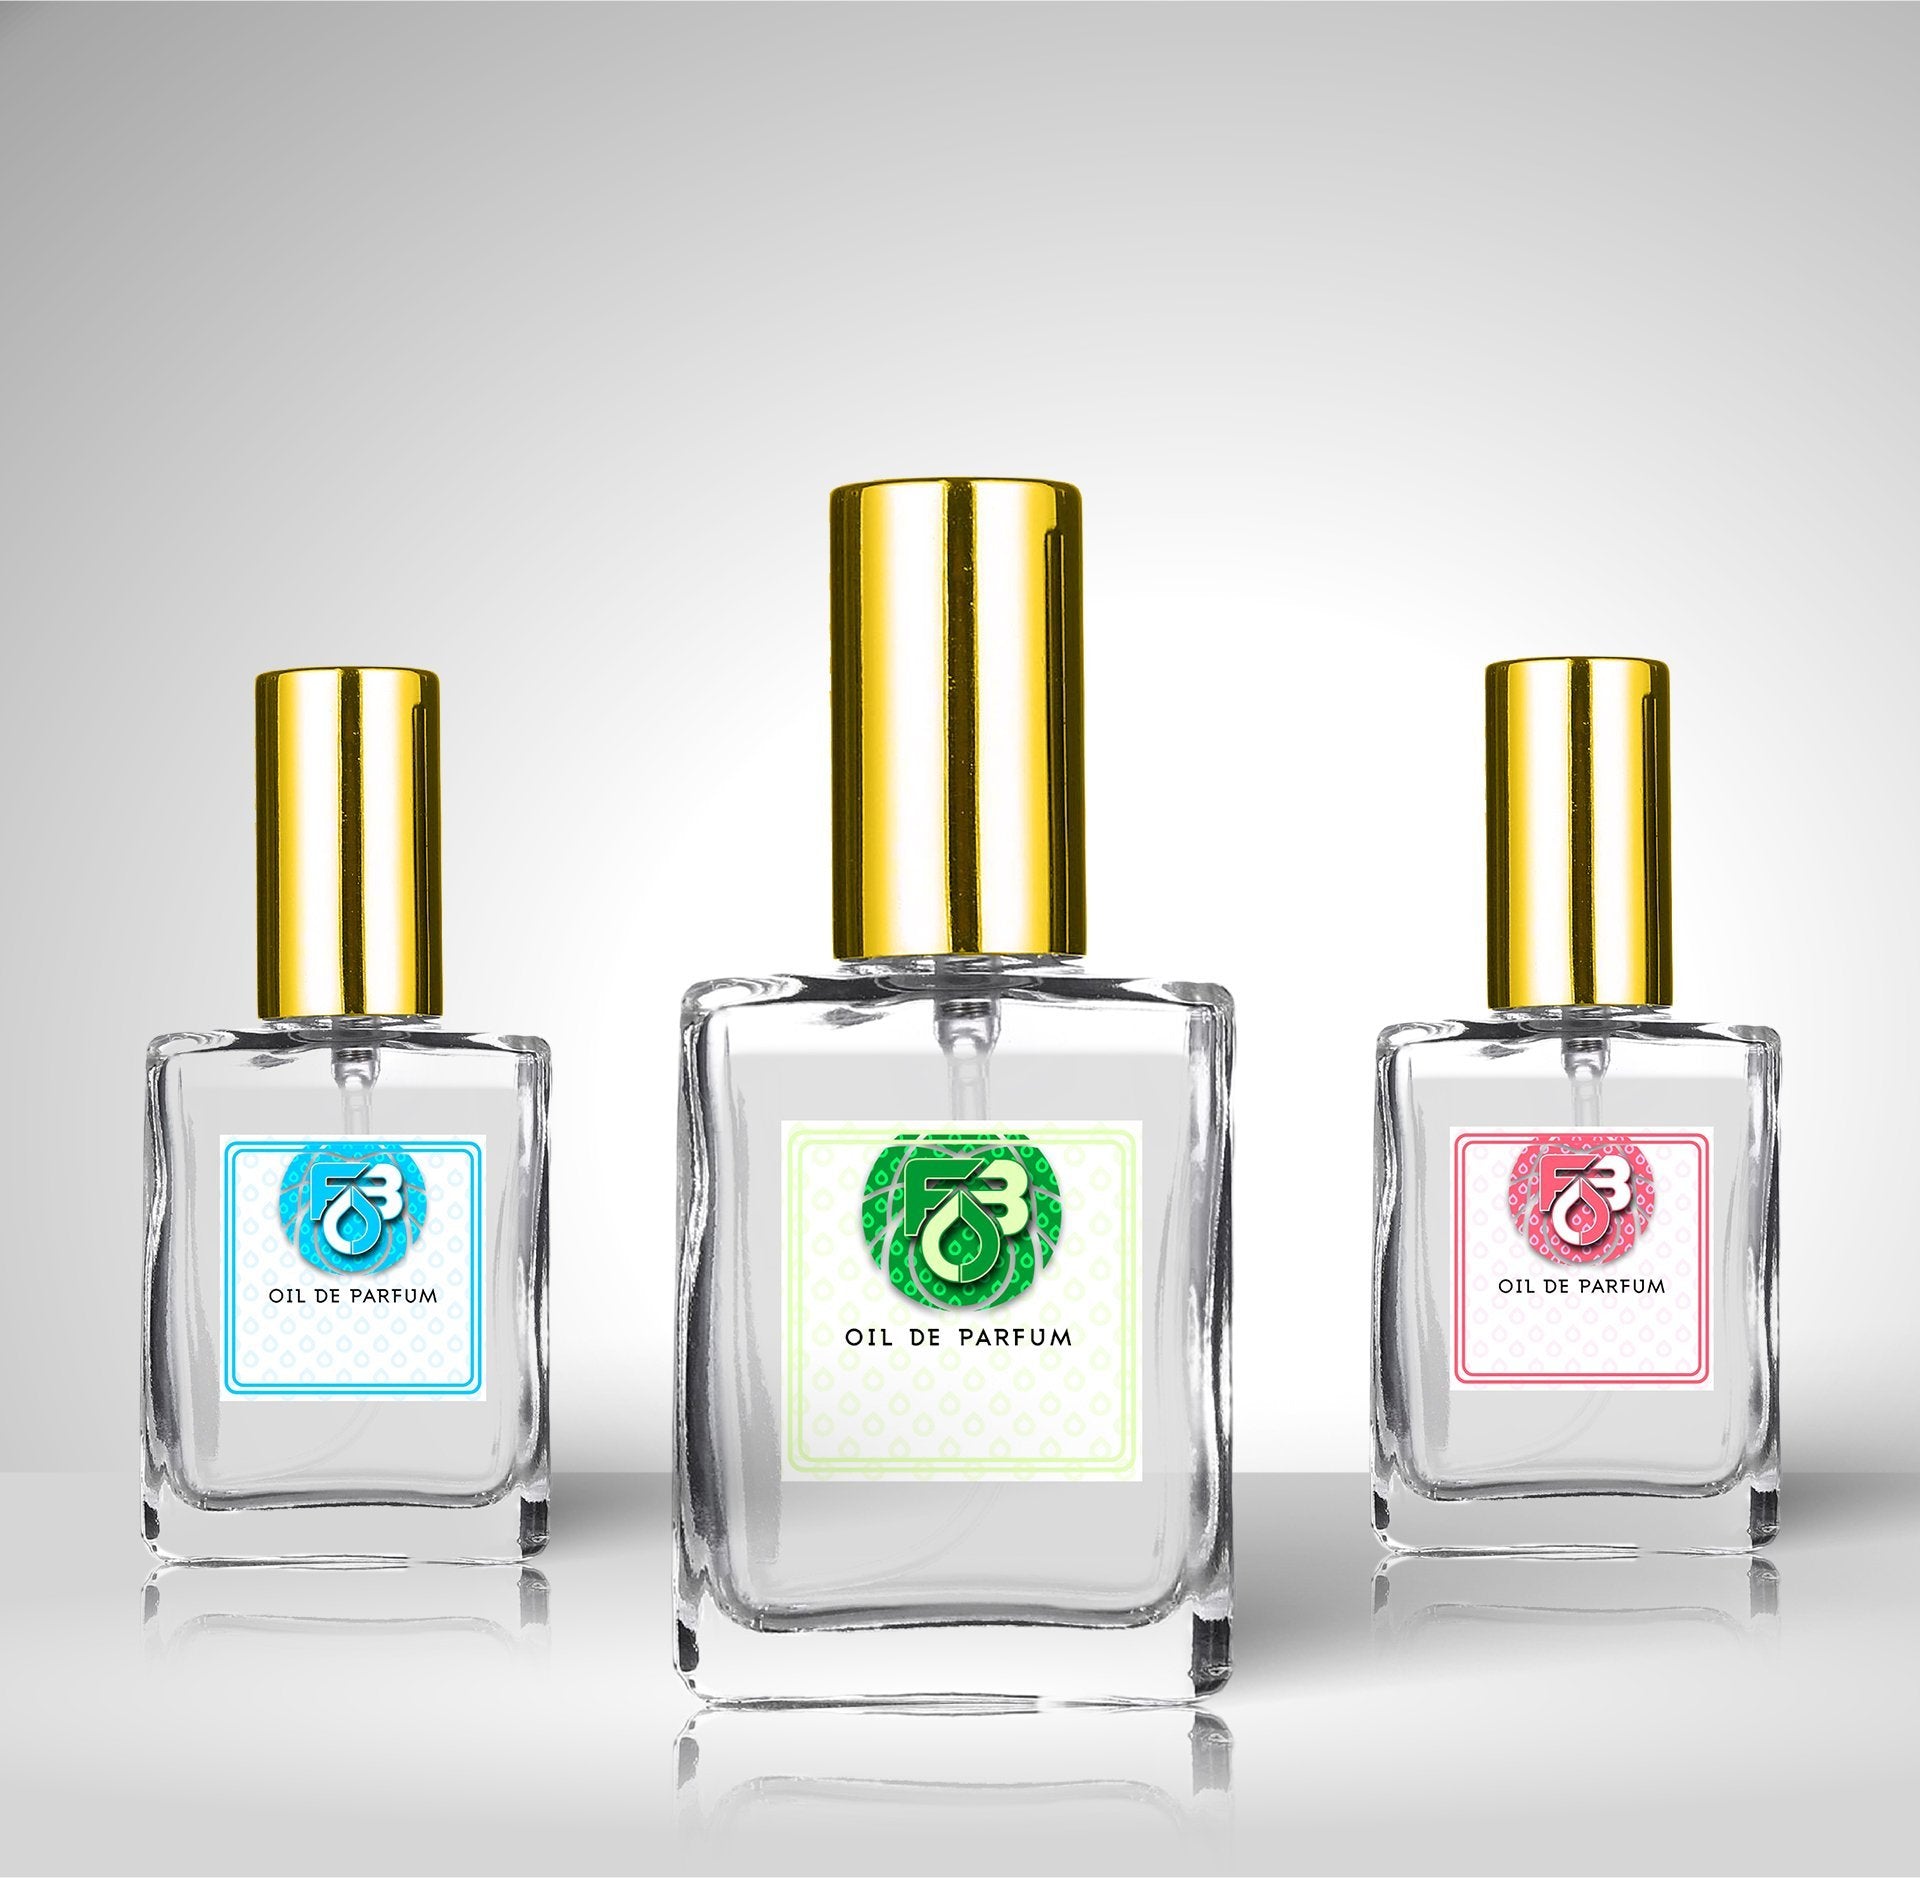 Compare Aroma to Woman®